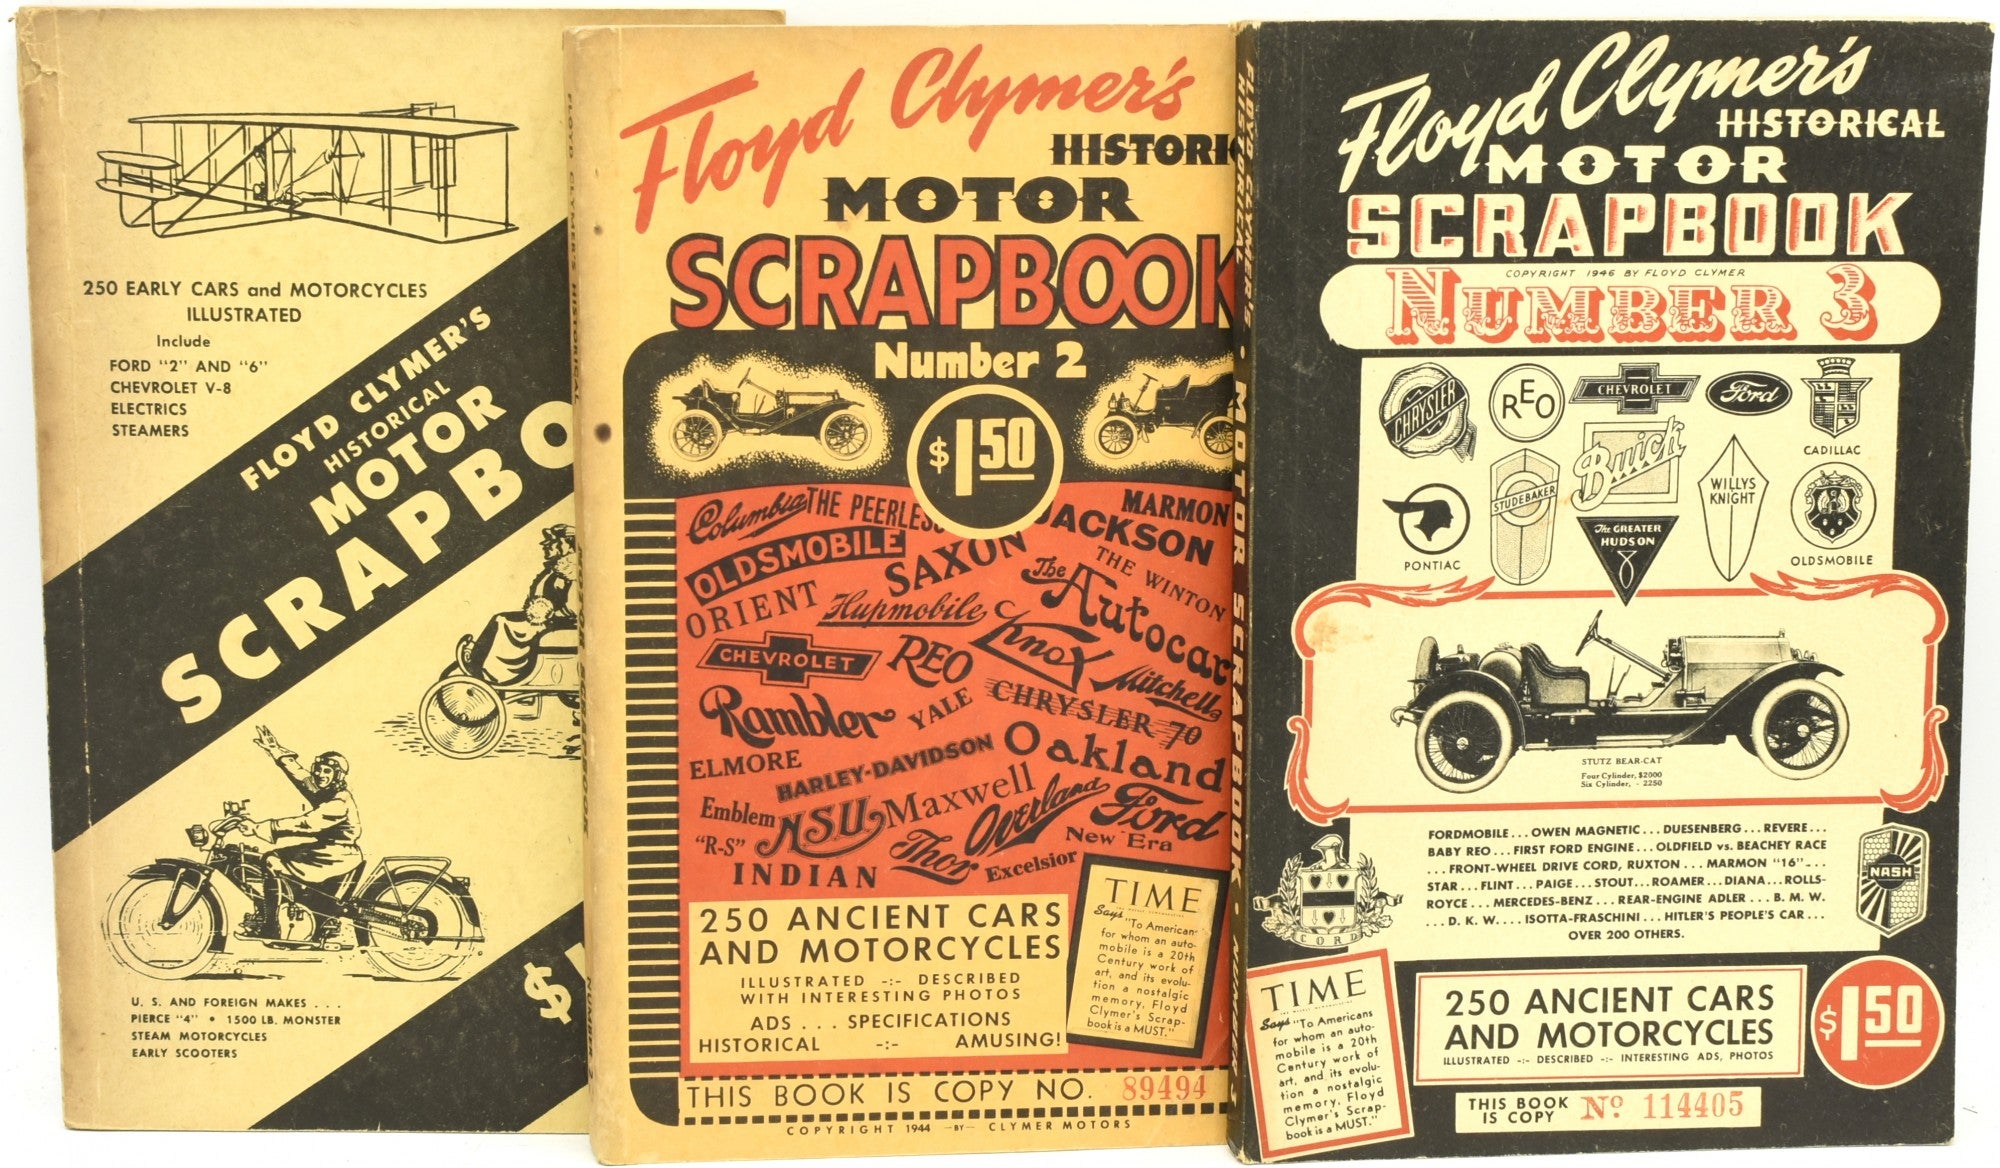 The Cadillac of Scrapbooks